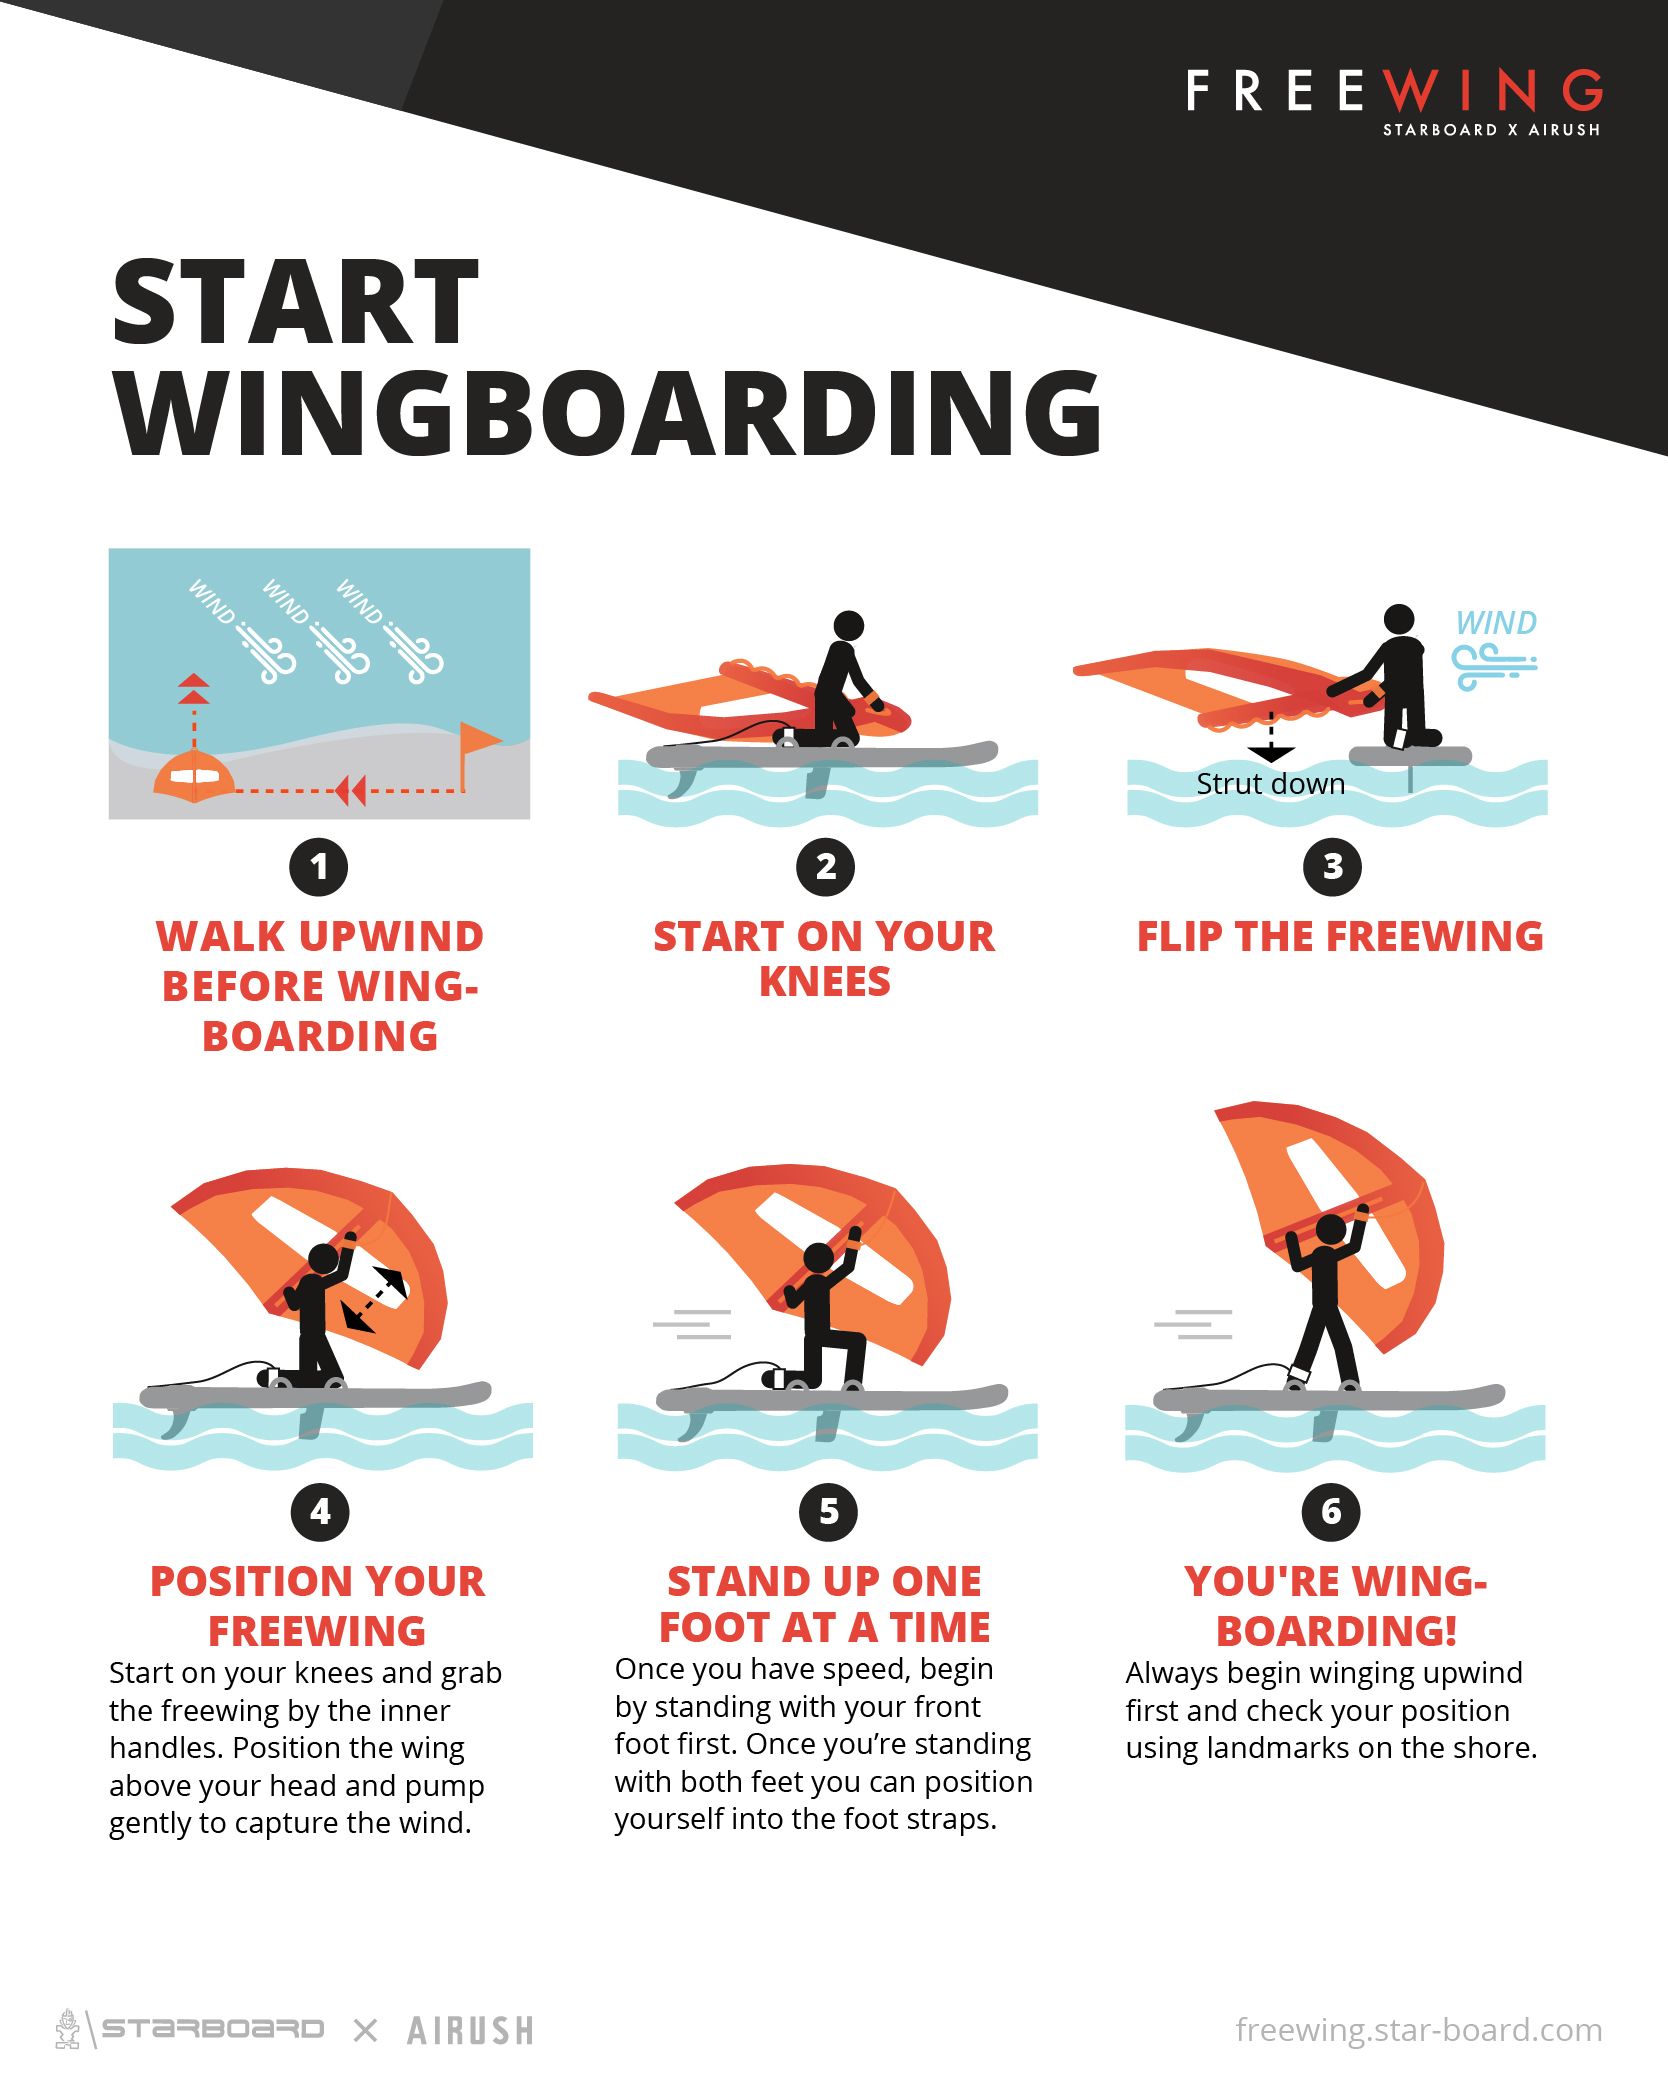 Wingboarding - A Simple Guide to Getting Started » FreeWing